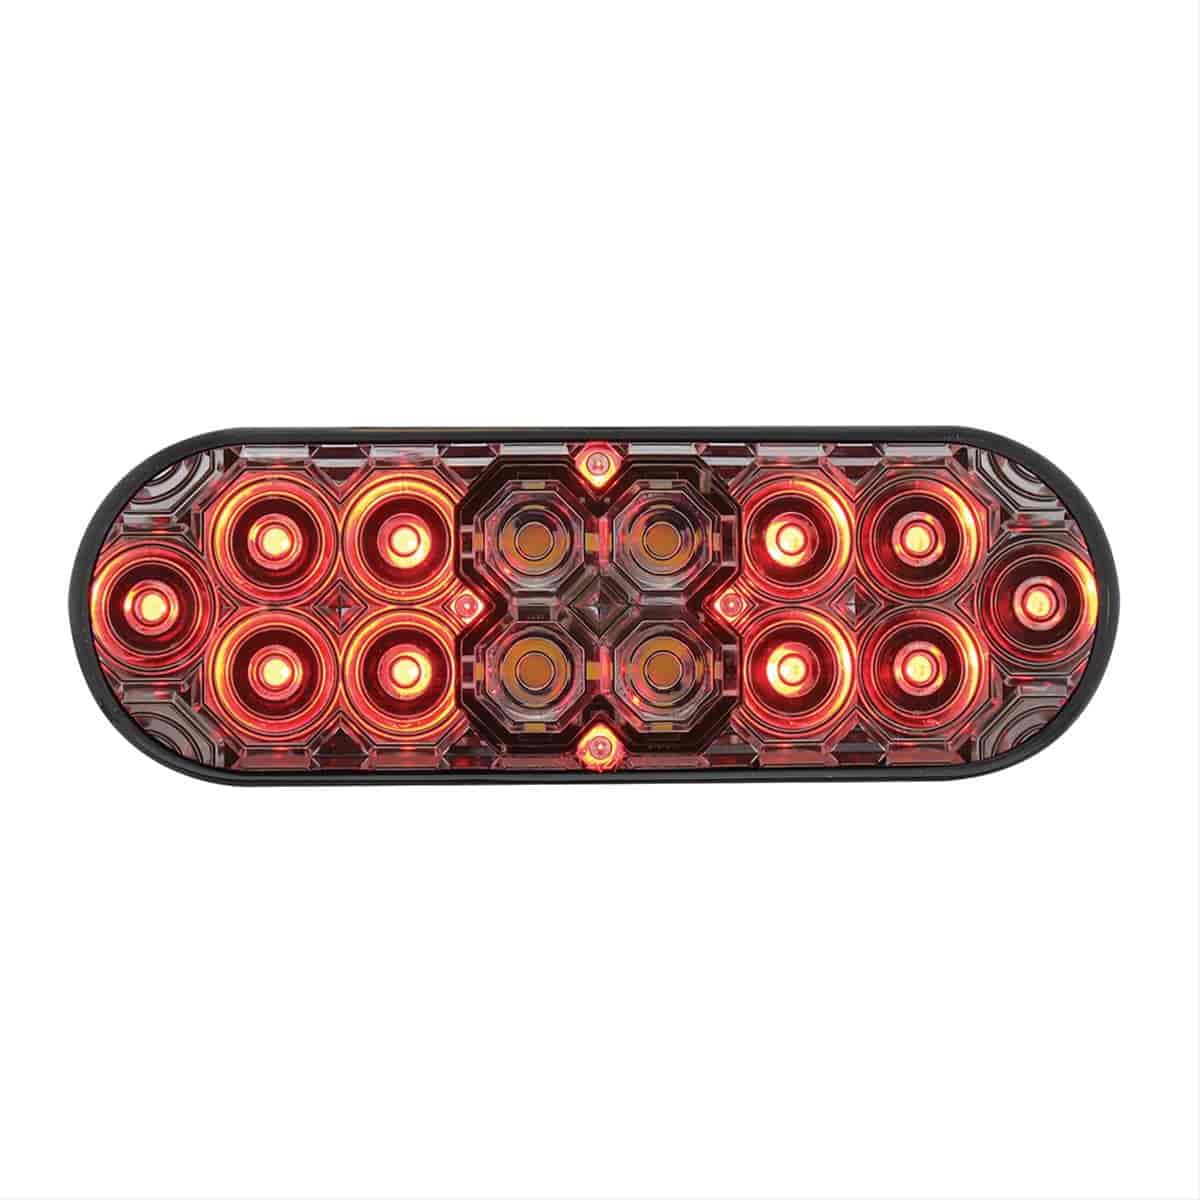 6 OVAL COMBO LIGHT WITH 1